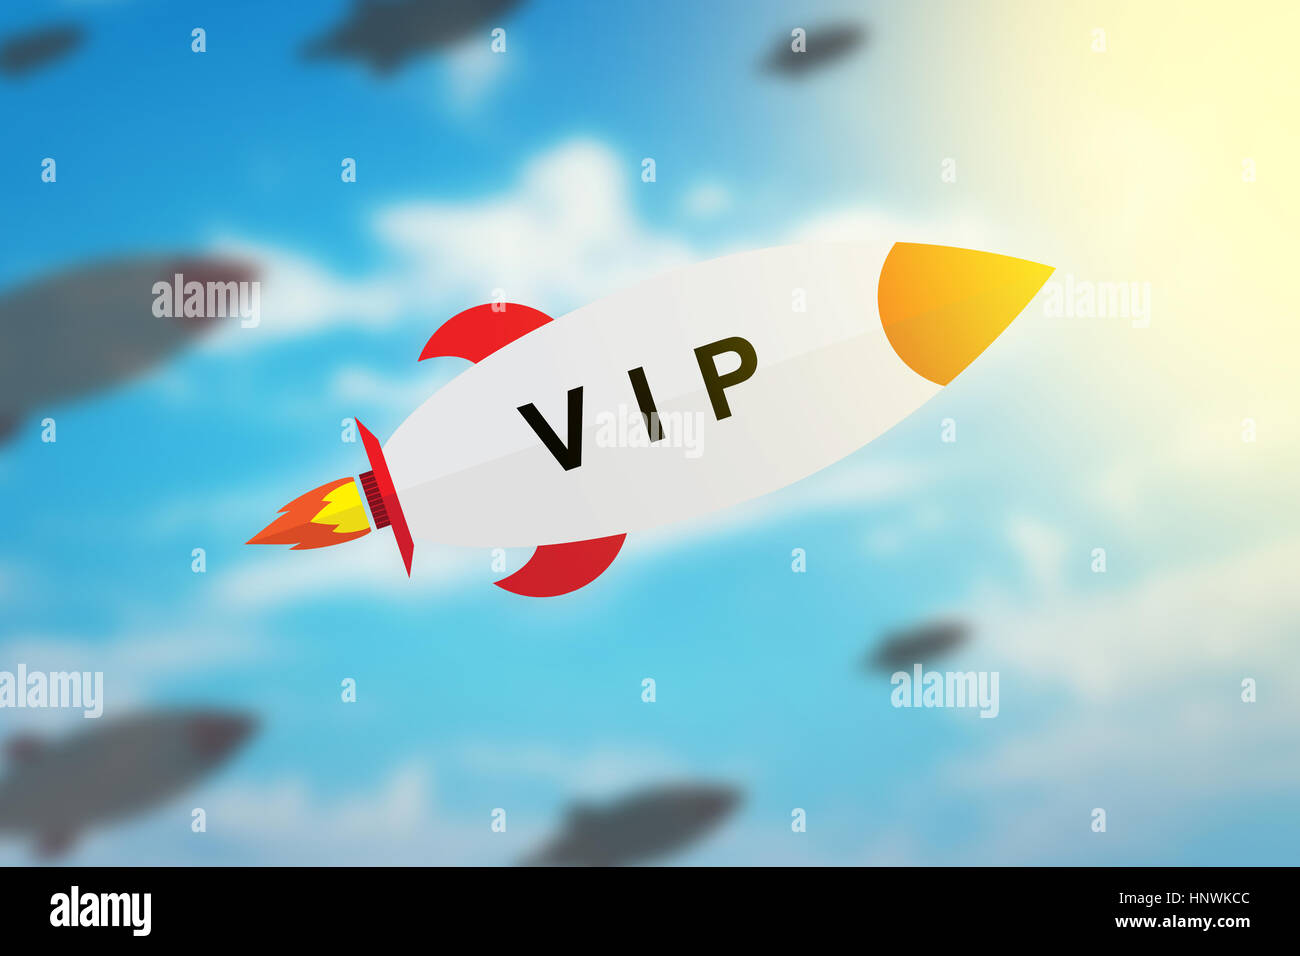 group of VIP or very important person flat design rocket with blurred background and soft light effect Stock Photo